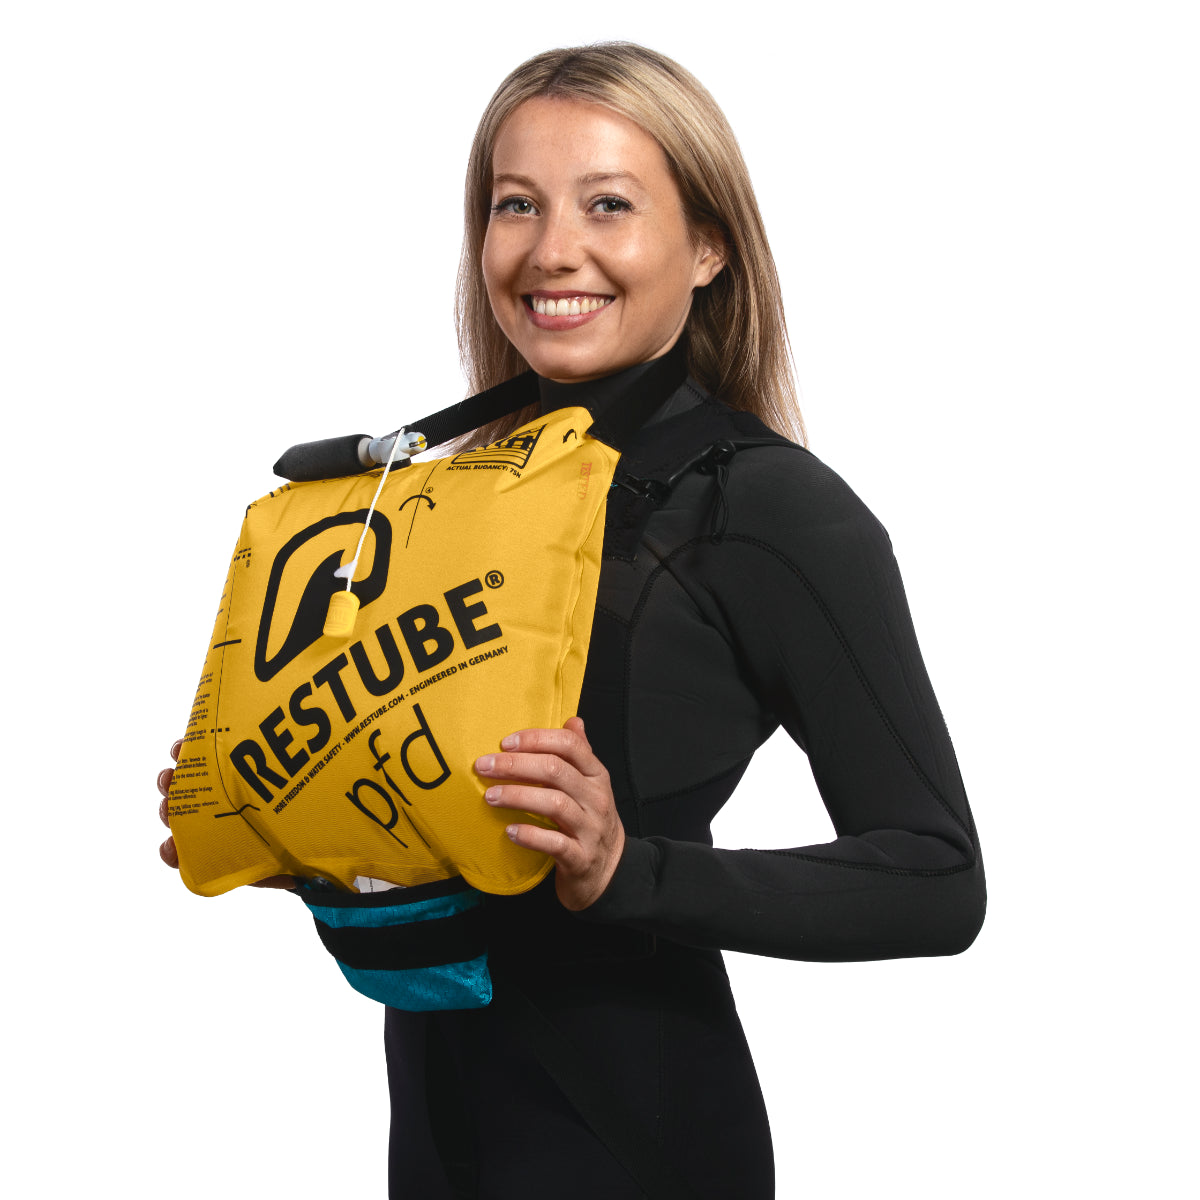 PFD by Restube - inflated, with female model